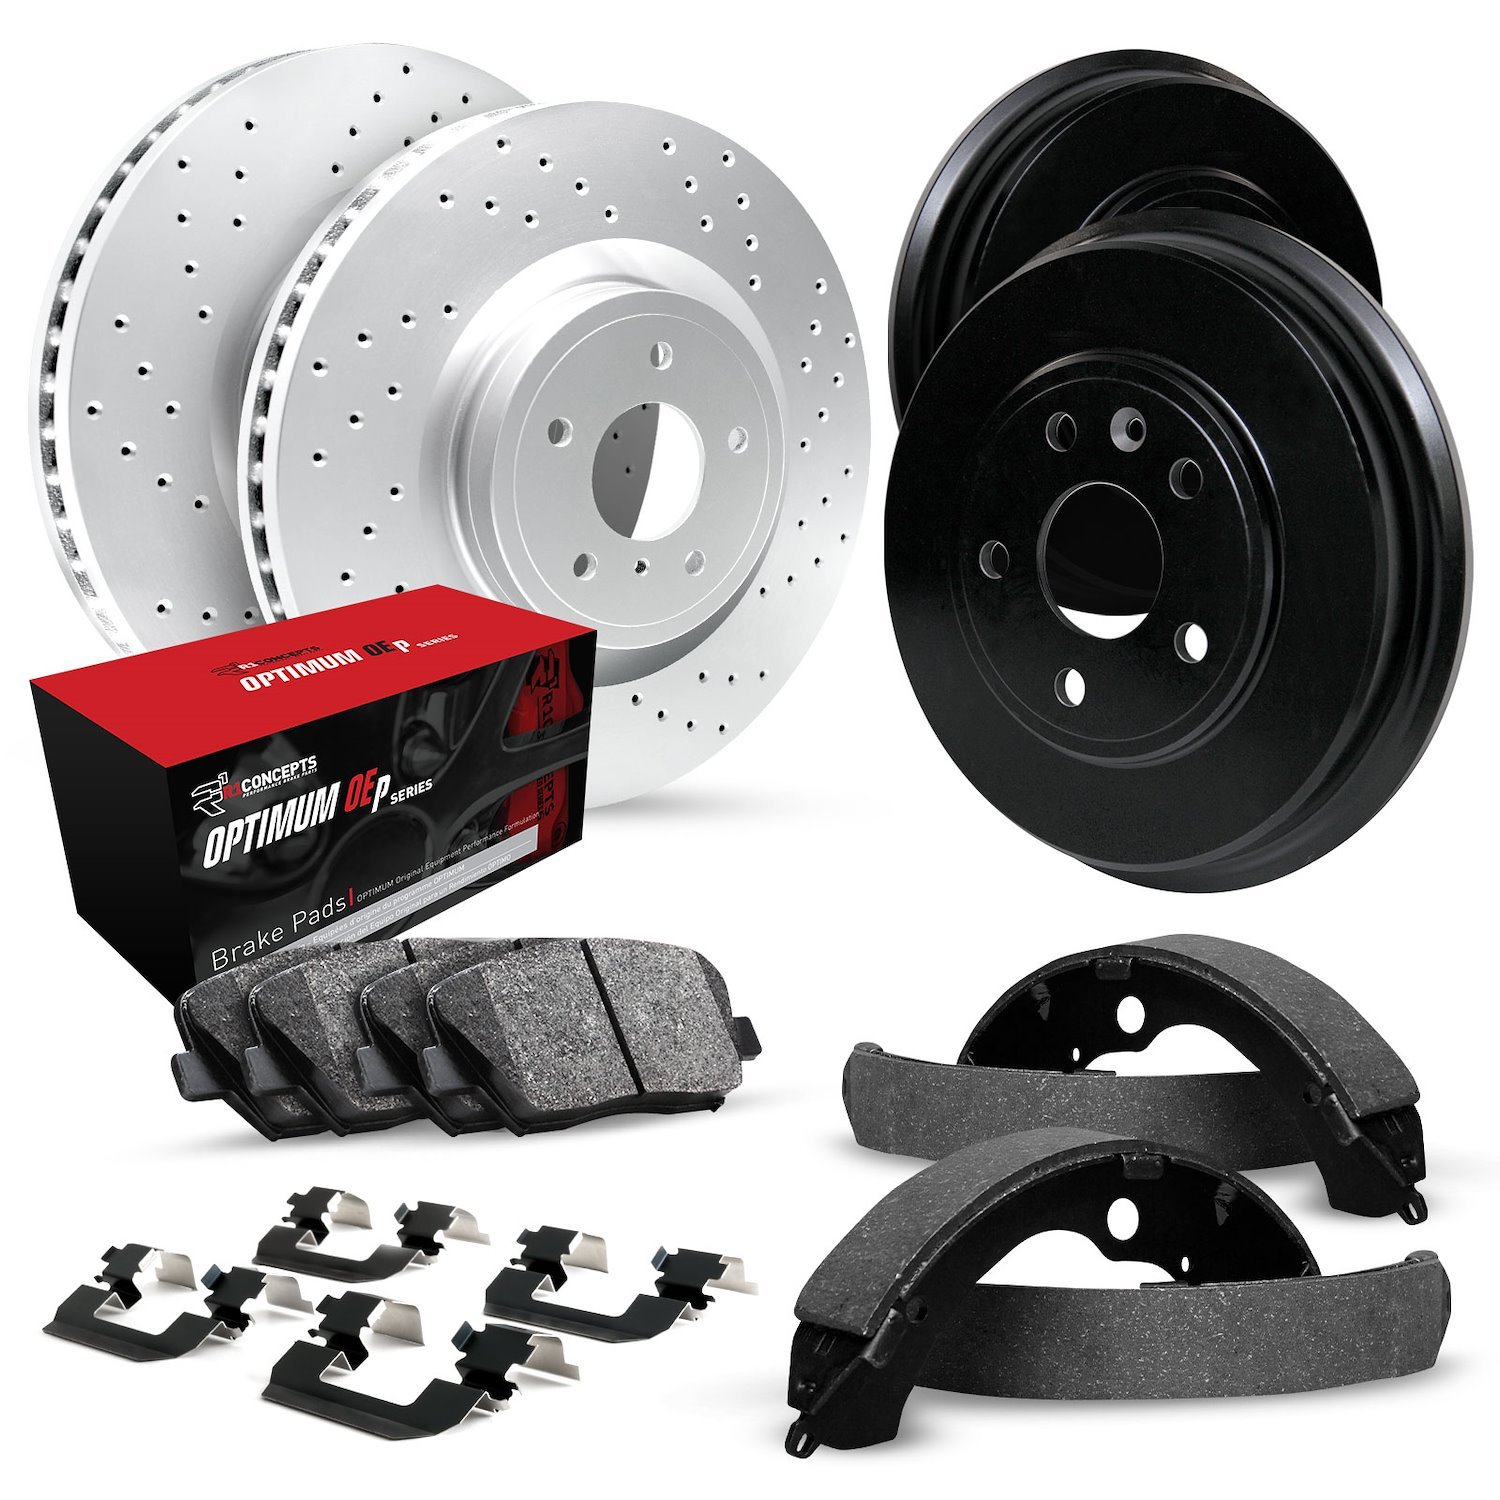 GEO-Carbon Drilled Brake Rotor & Drum Set w/Optimum OE Pads, Shoes, & Hardware, 1997-1999 GM, Position: Front & Rear